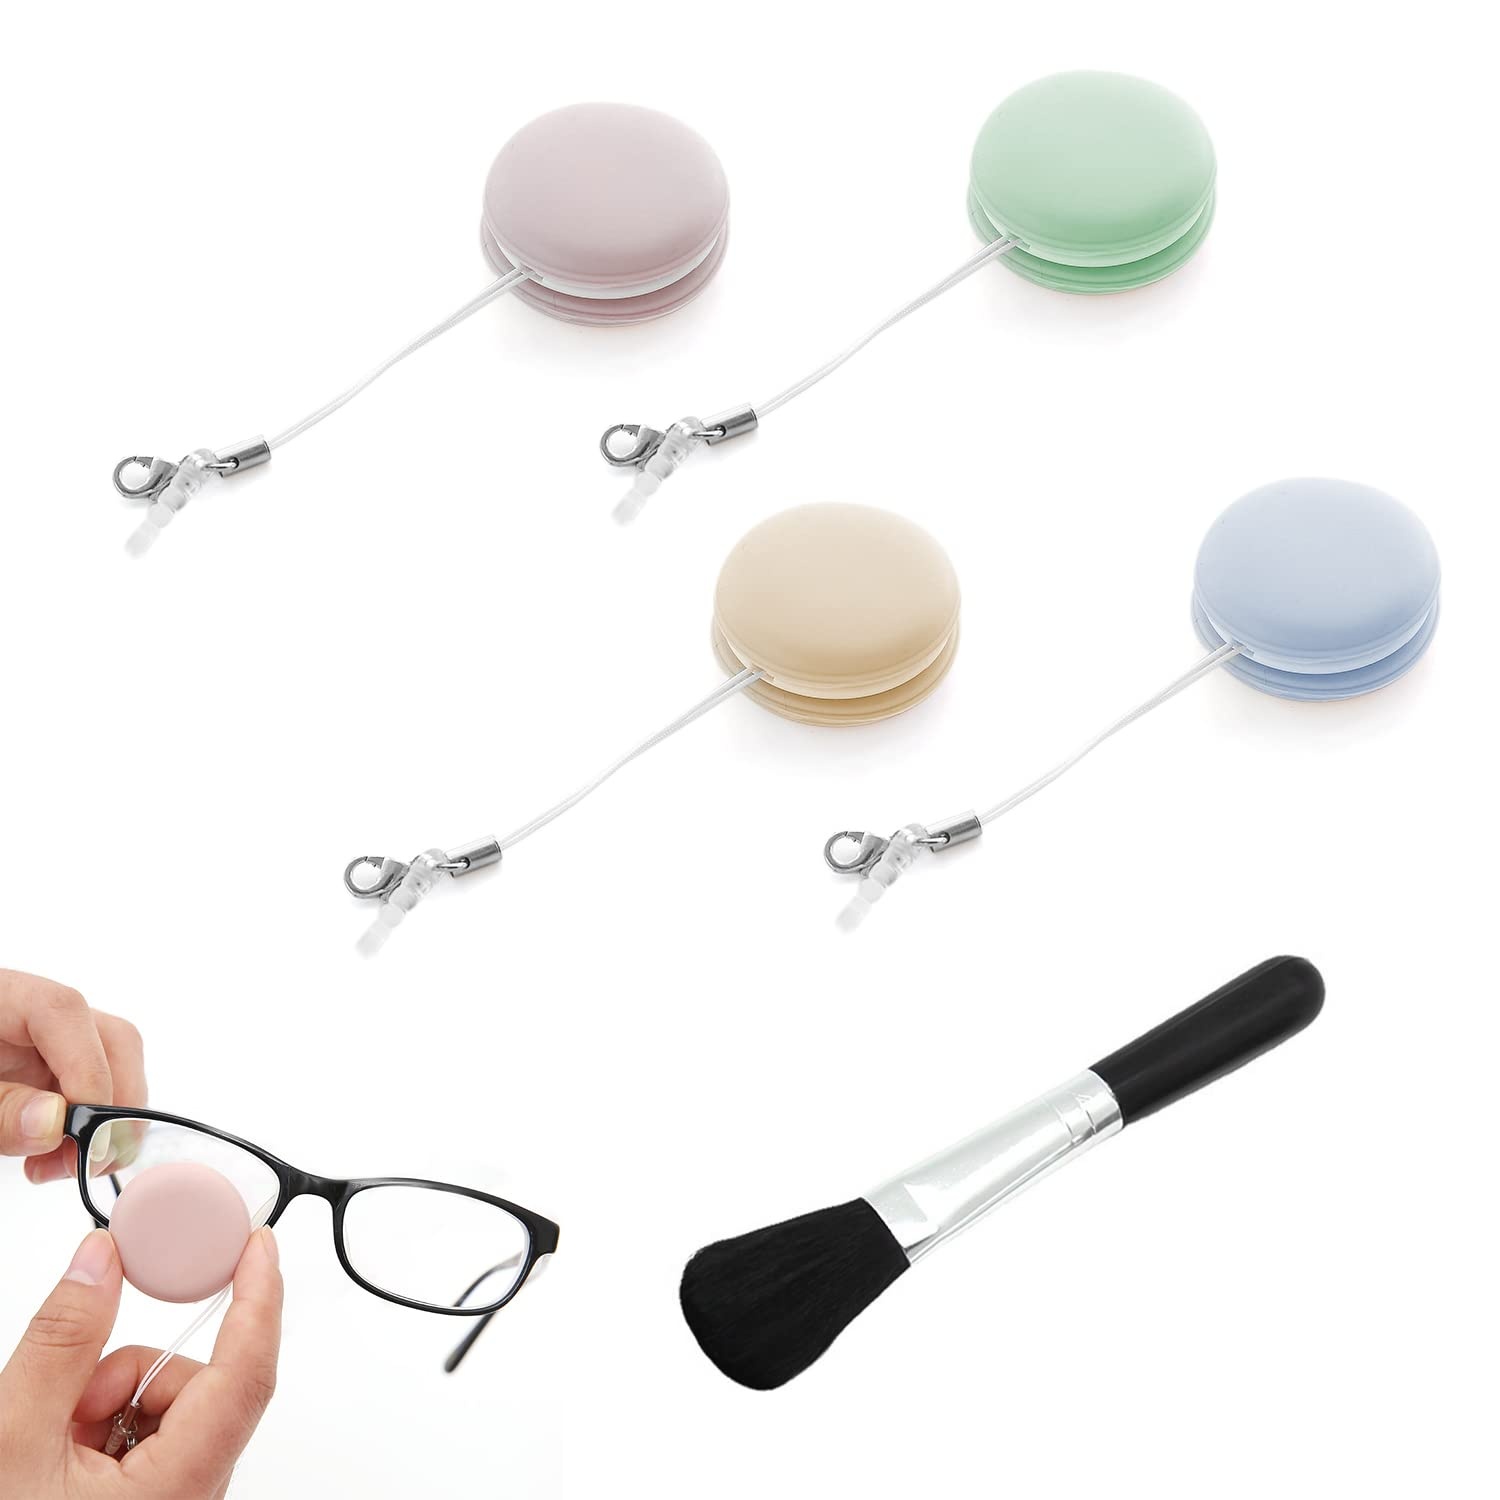 4 Pieces of Macaroni Color Screen Wipe, Mobile Phone, Eyeglasses, Camera Lens Wipe and 1 Piece of Cleaning Brush, Succulents dust Brush, Mobile Phone Accessories